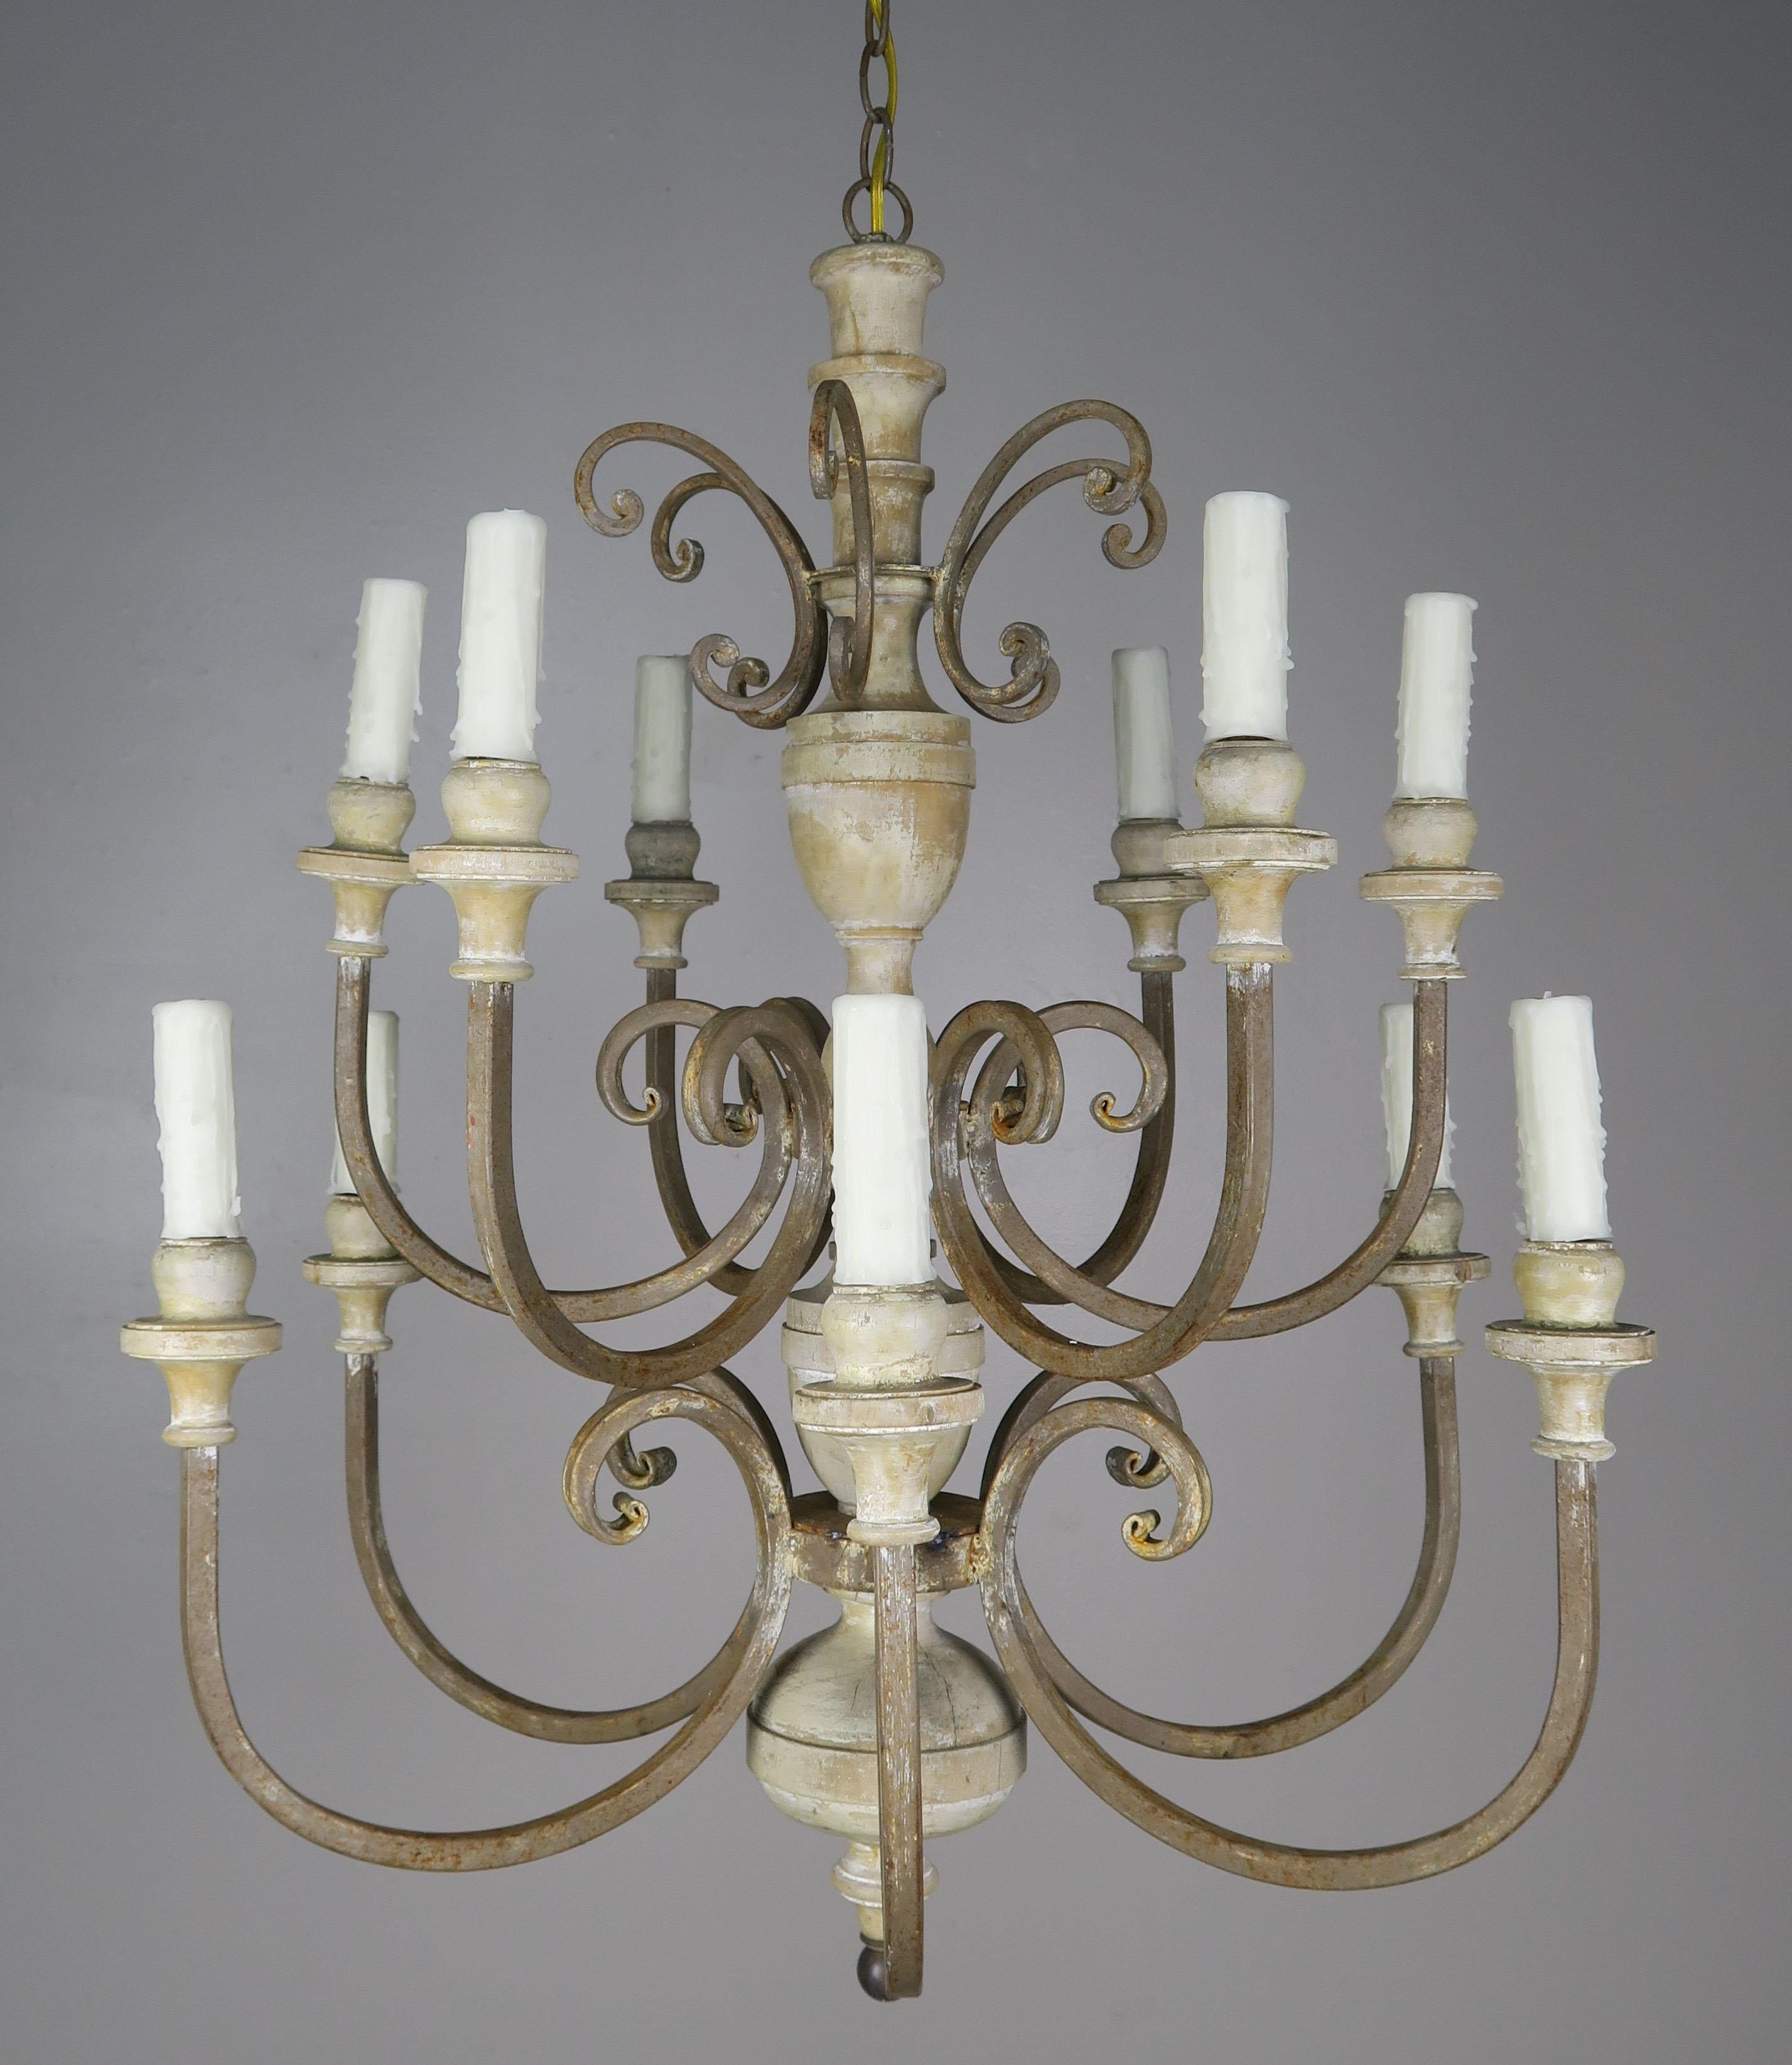 Twelve-light, two-tier Italian wrought iron and wood chandelier with a beautiful weathered finish. The fixture has been newly rewired with drip wax candle covers and is ready to install with chain and canopy.